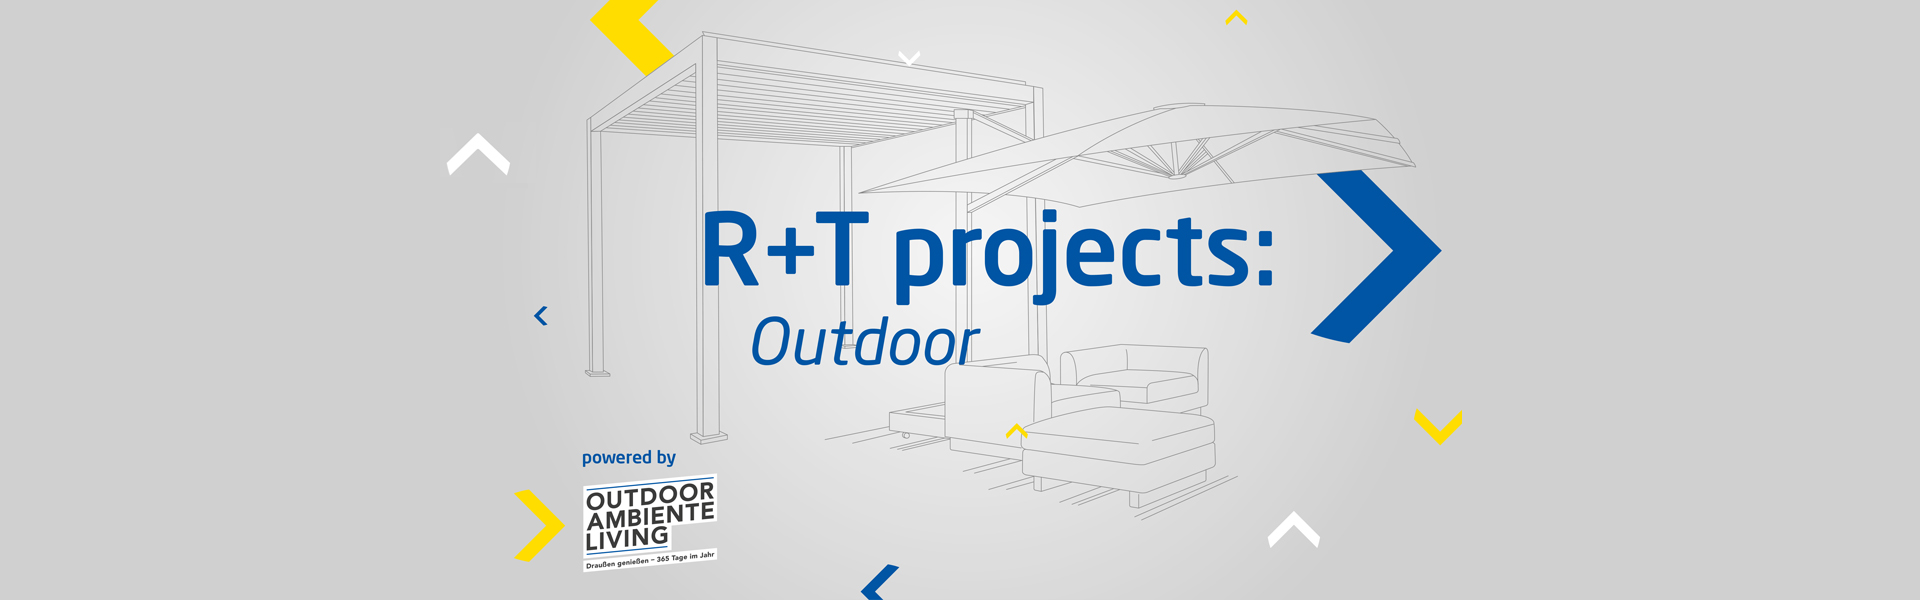 R+T projects